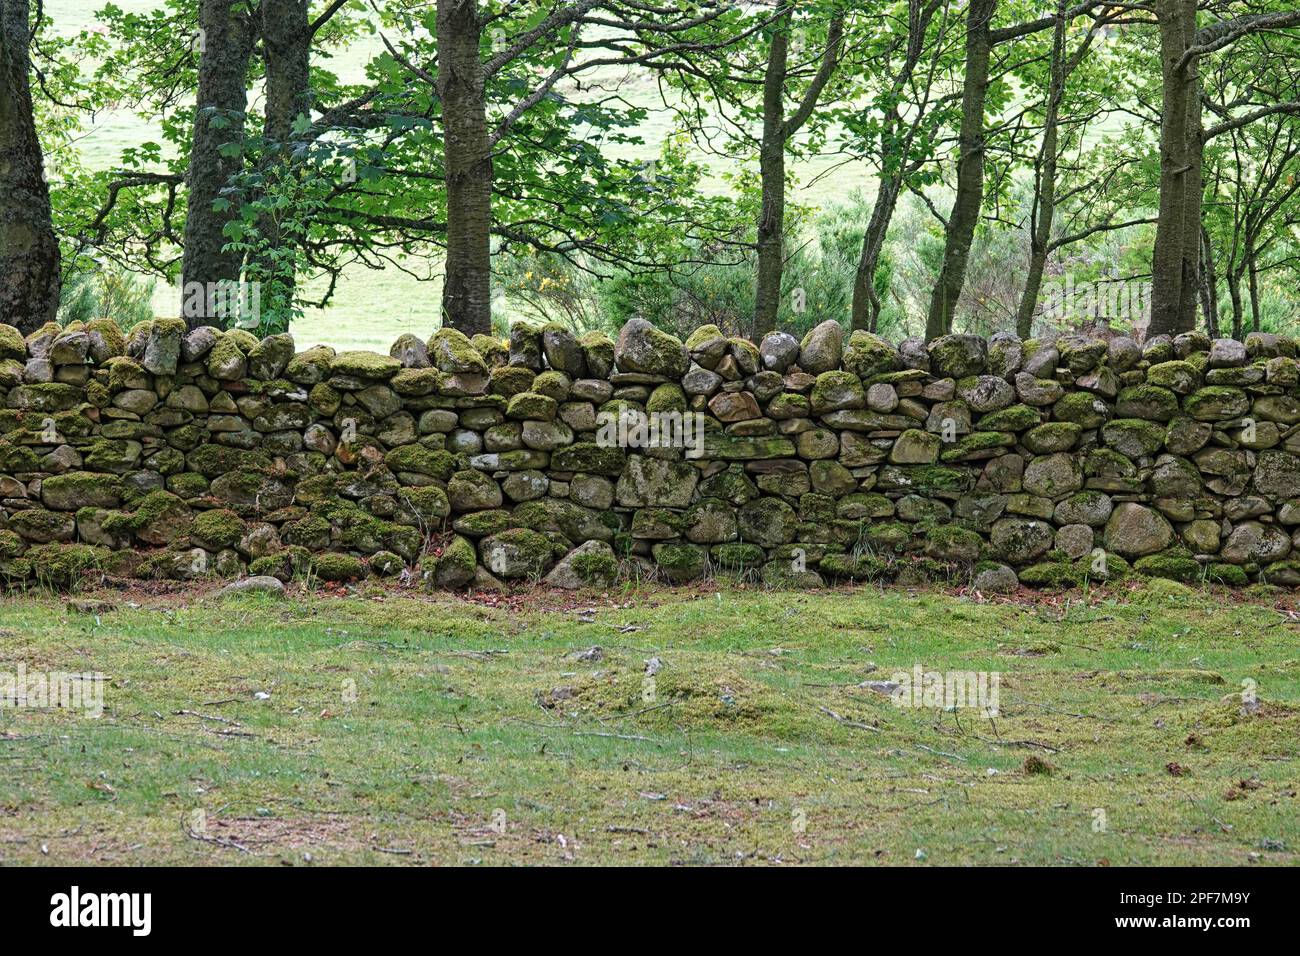 A Irish dry stone wall divides two agricultural fields. Some of these stonework walls date back thousands of years, although most are centuries-old. Stock Photo